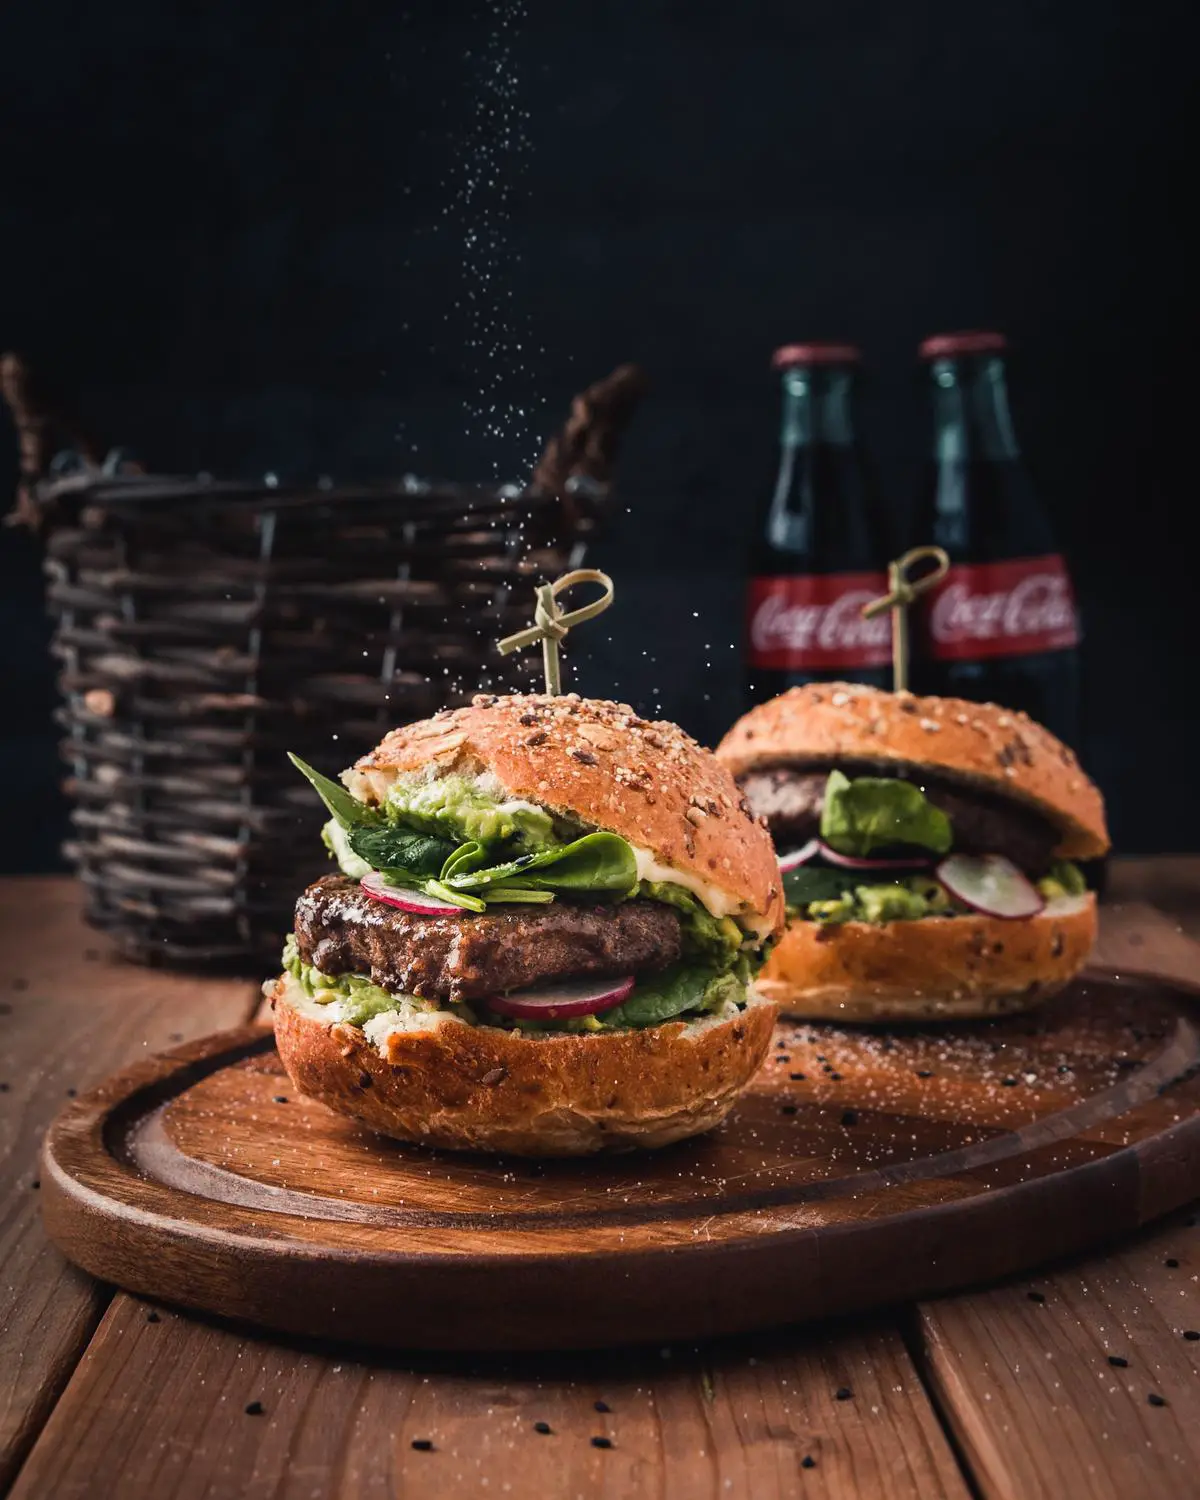 The Spicy Boerie Burger is a burger from McDonald's that became popular in South Africa. It includes local spices and ingredients, such as the boerewors sausage.